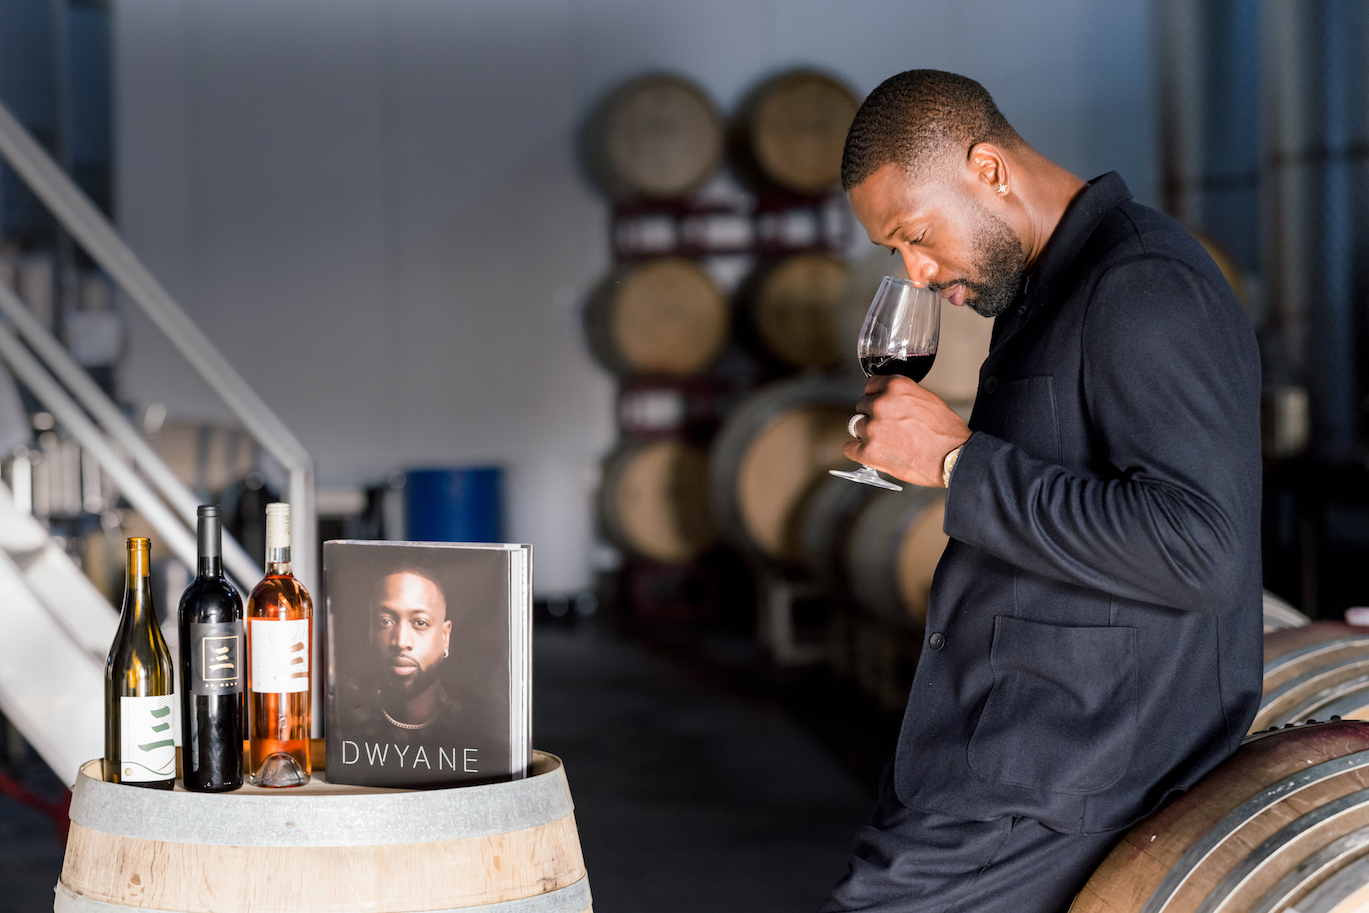 How Dwyane Wade Is Bringing A New Voice To The Wine Industry